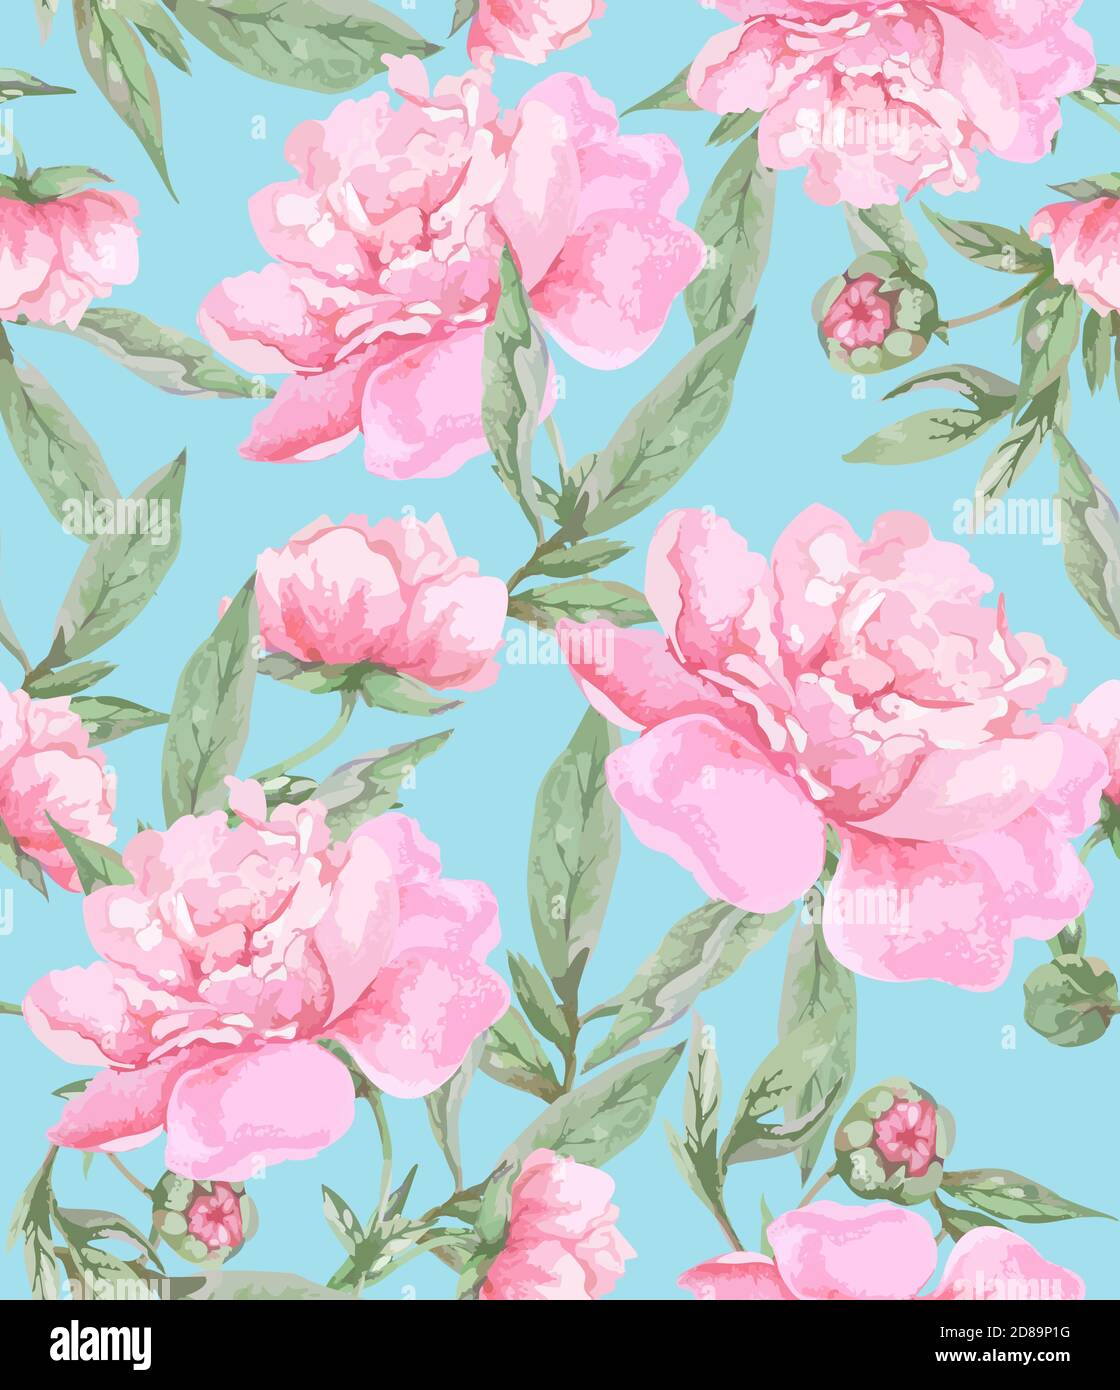 Pink peony flowers with leaves on a blue background. Seamless pattern. Romantic watercolor floral design for greeting cards, fabric print. Stock Vector